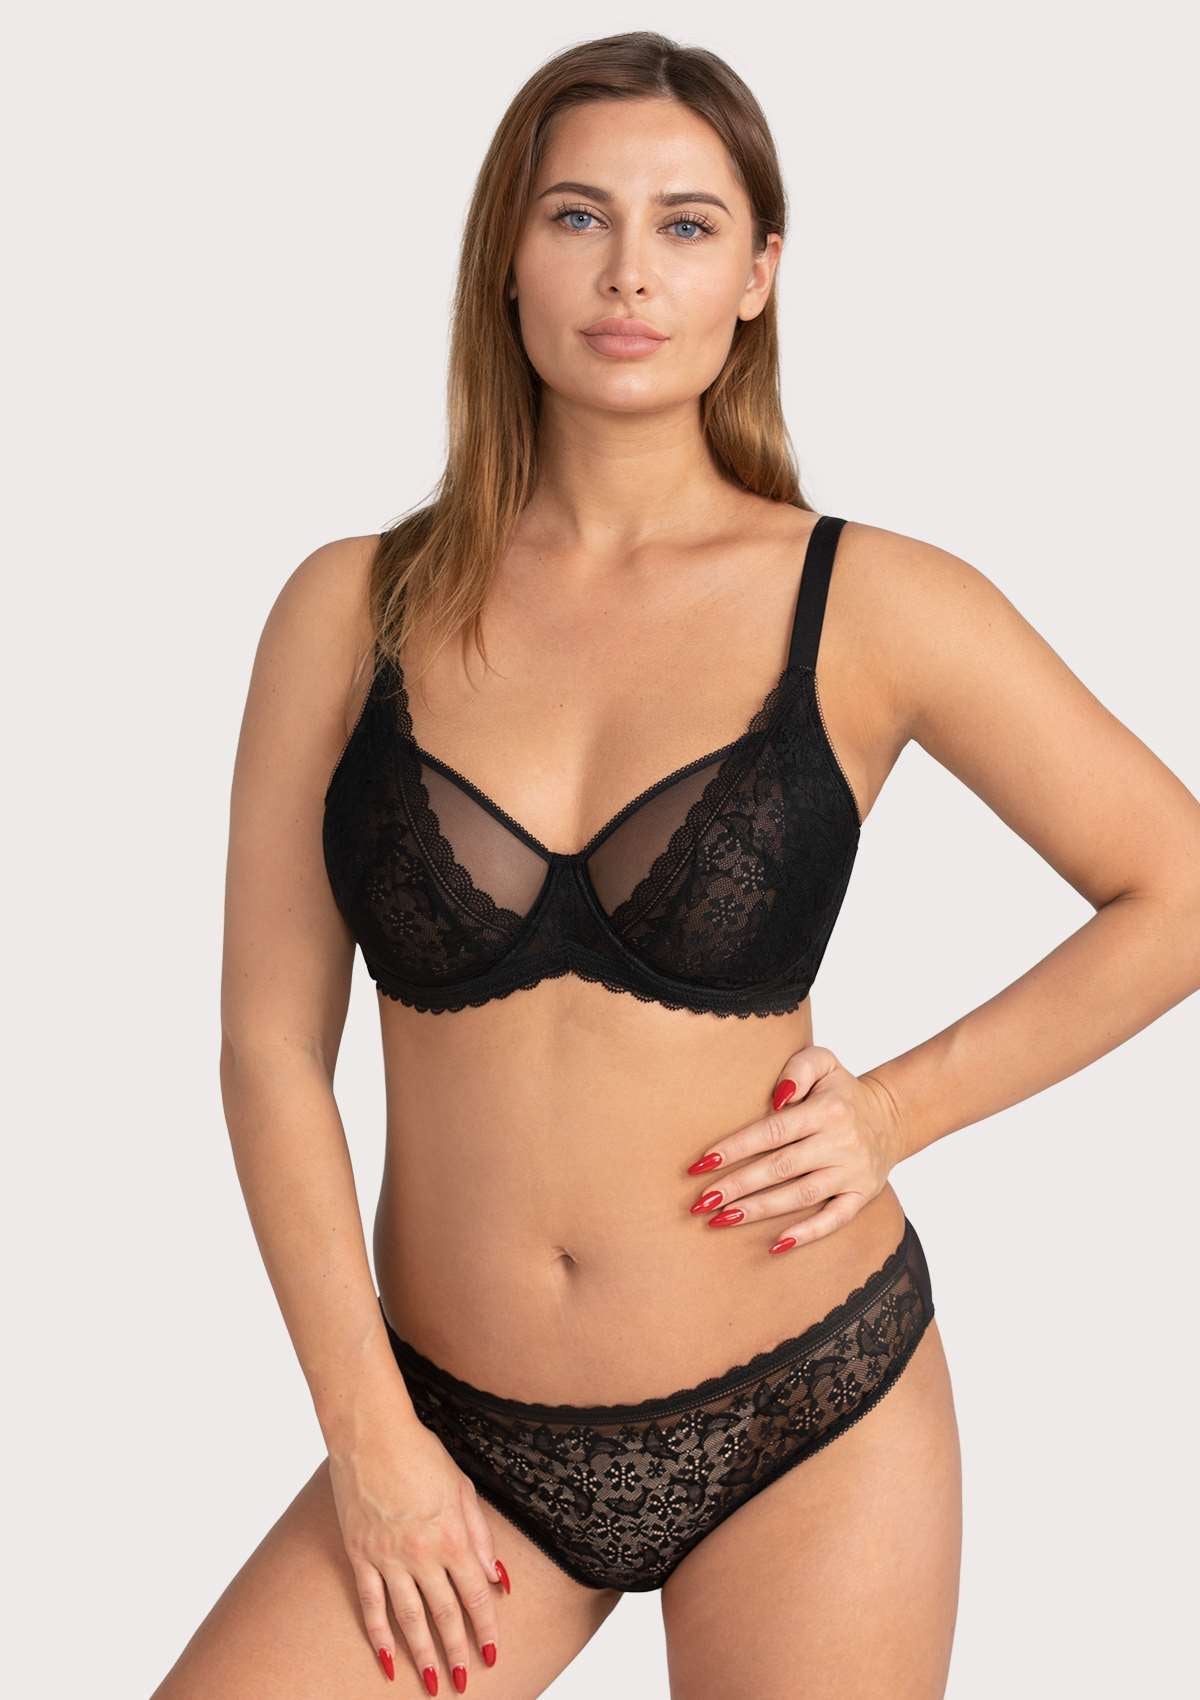 HSIA Anemone Lace Bra And Panties: Back Support Wired Bra - Black / 42 / C